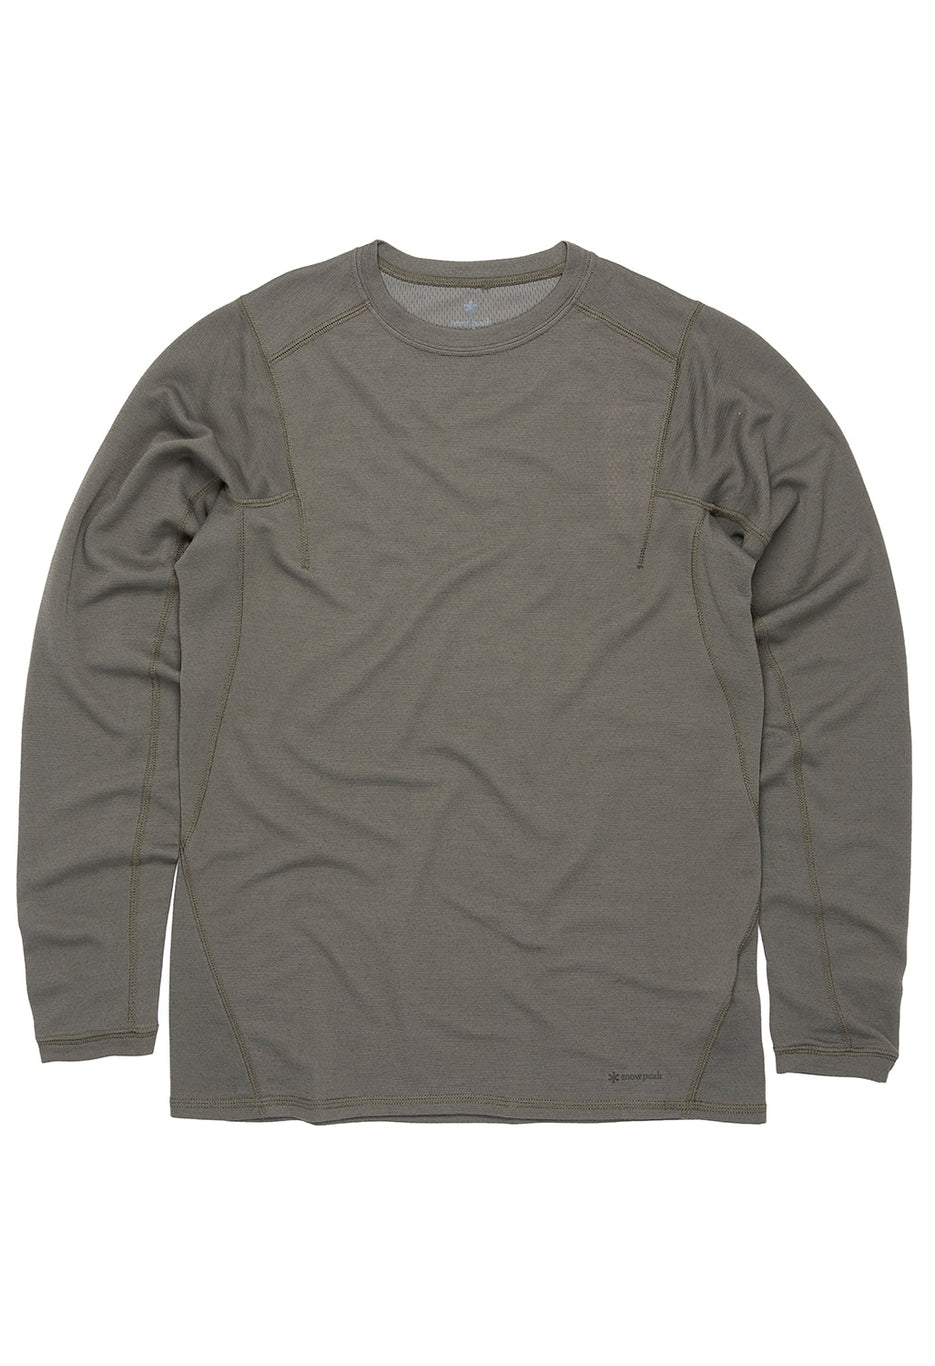 Snow Peak Men's Recycled Pe/Wo Long Sleeved T-Shirt - Olive